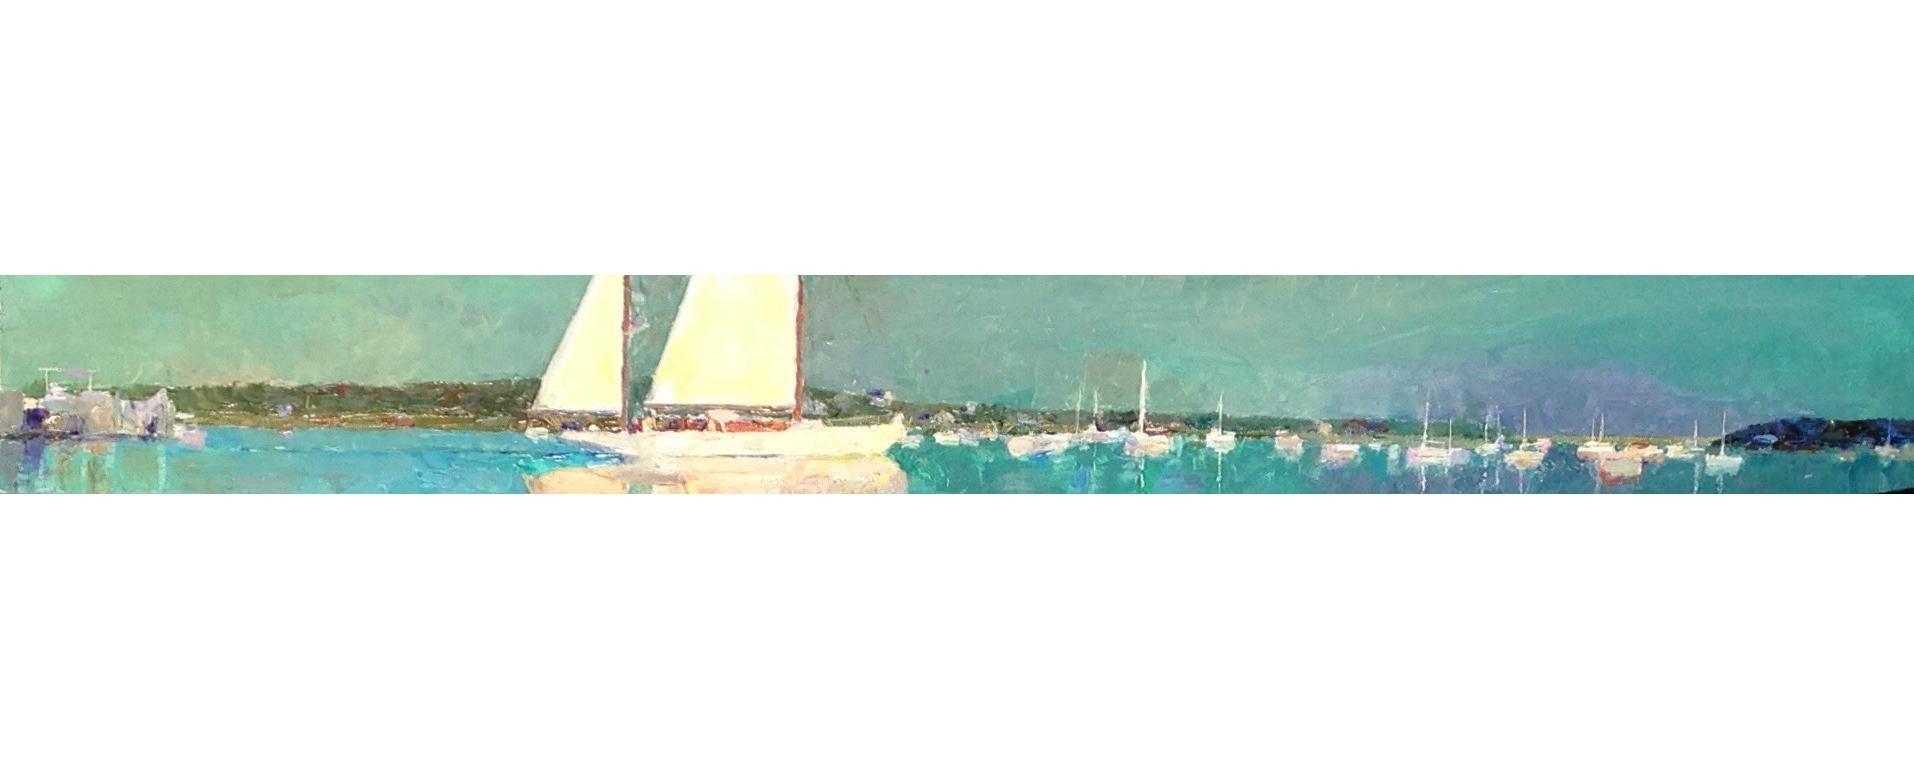 Larry Horowitz Landscape Painting - "Yawl in the Harbor" panoramic oil painting of a Sailboat in Edgartown Harbor